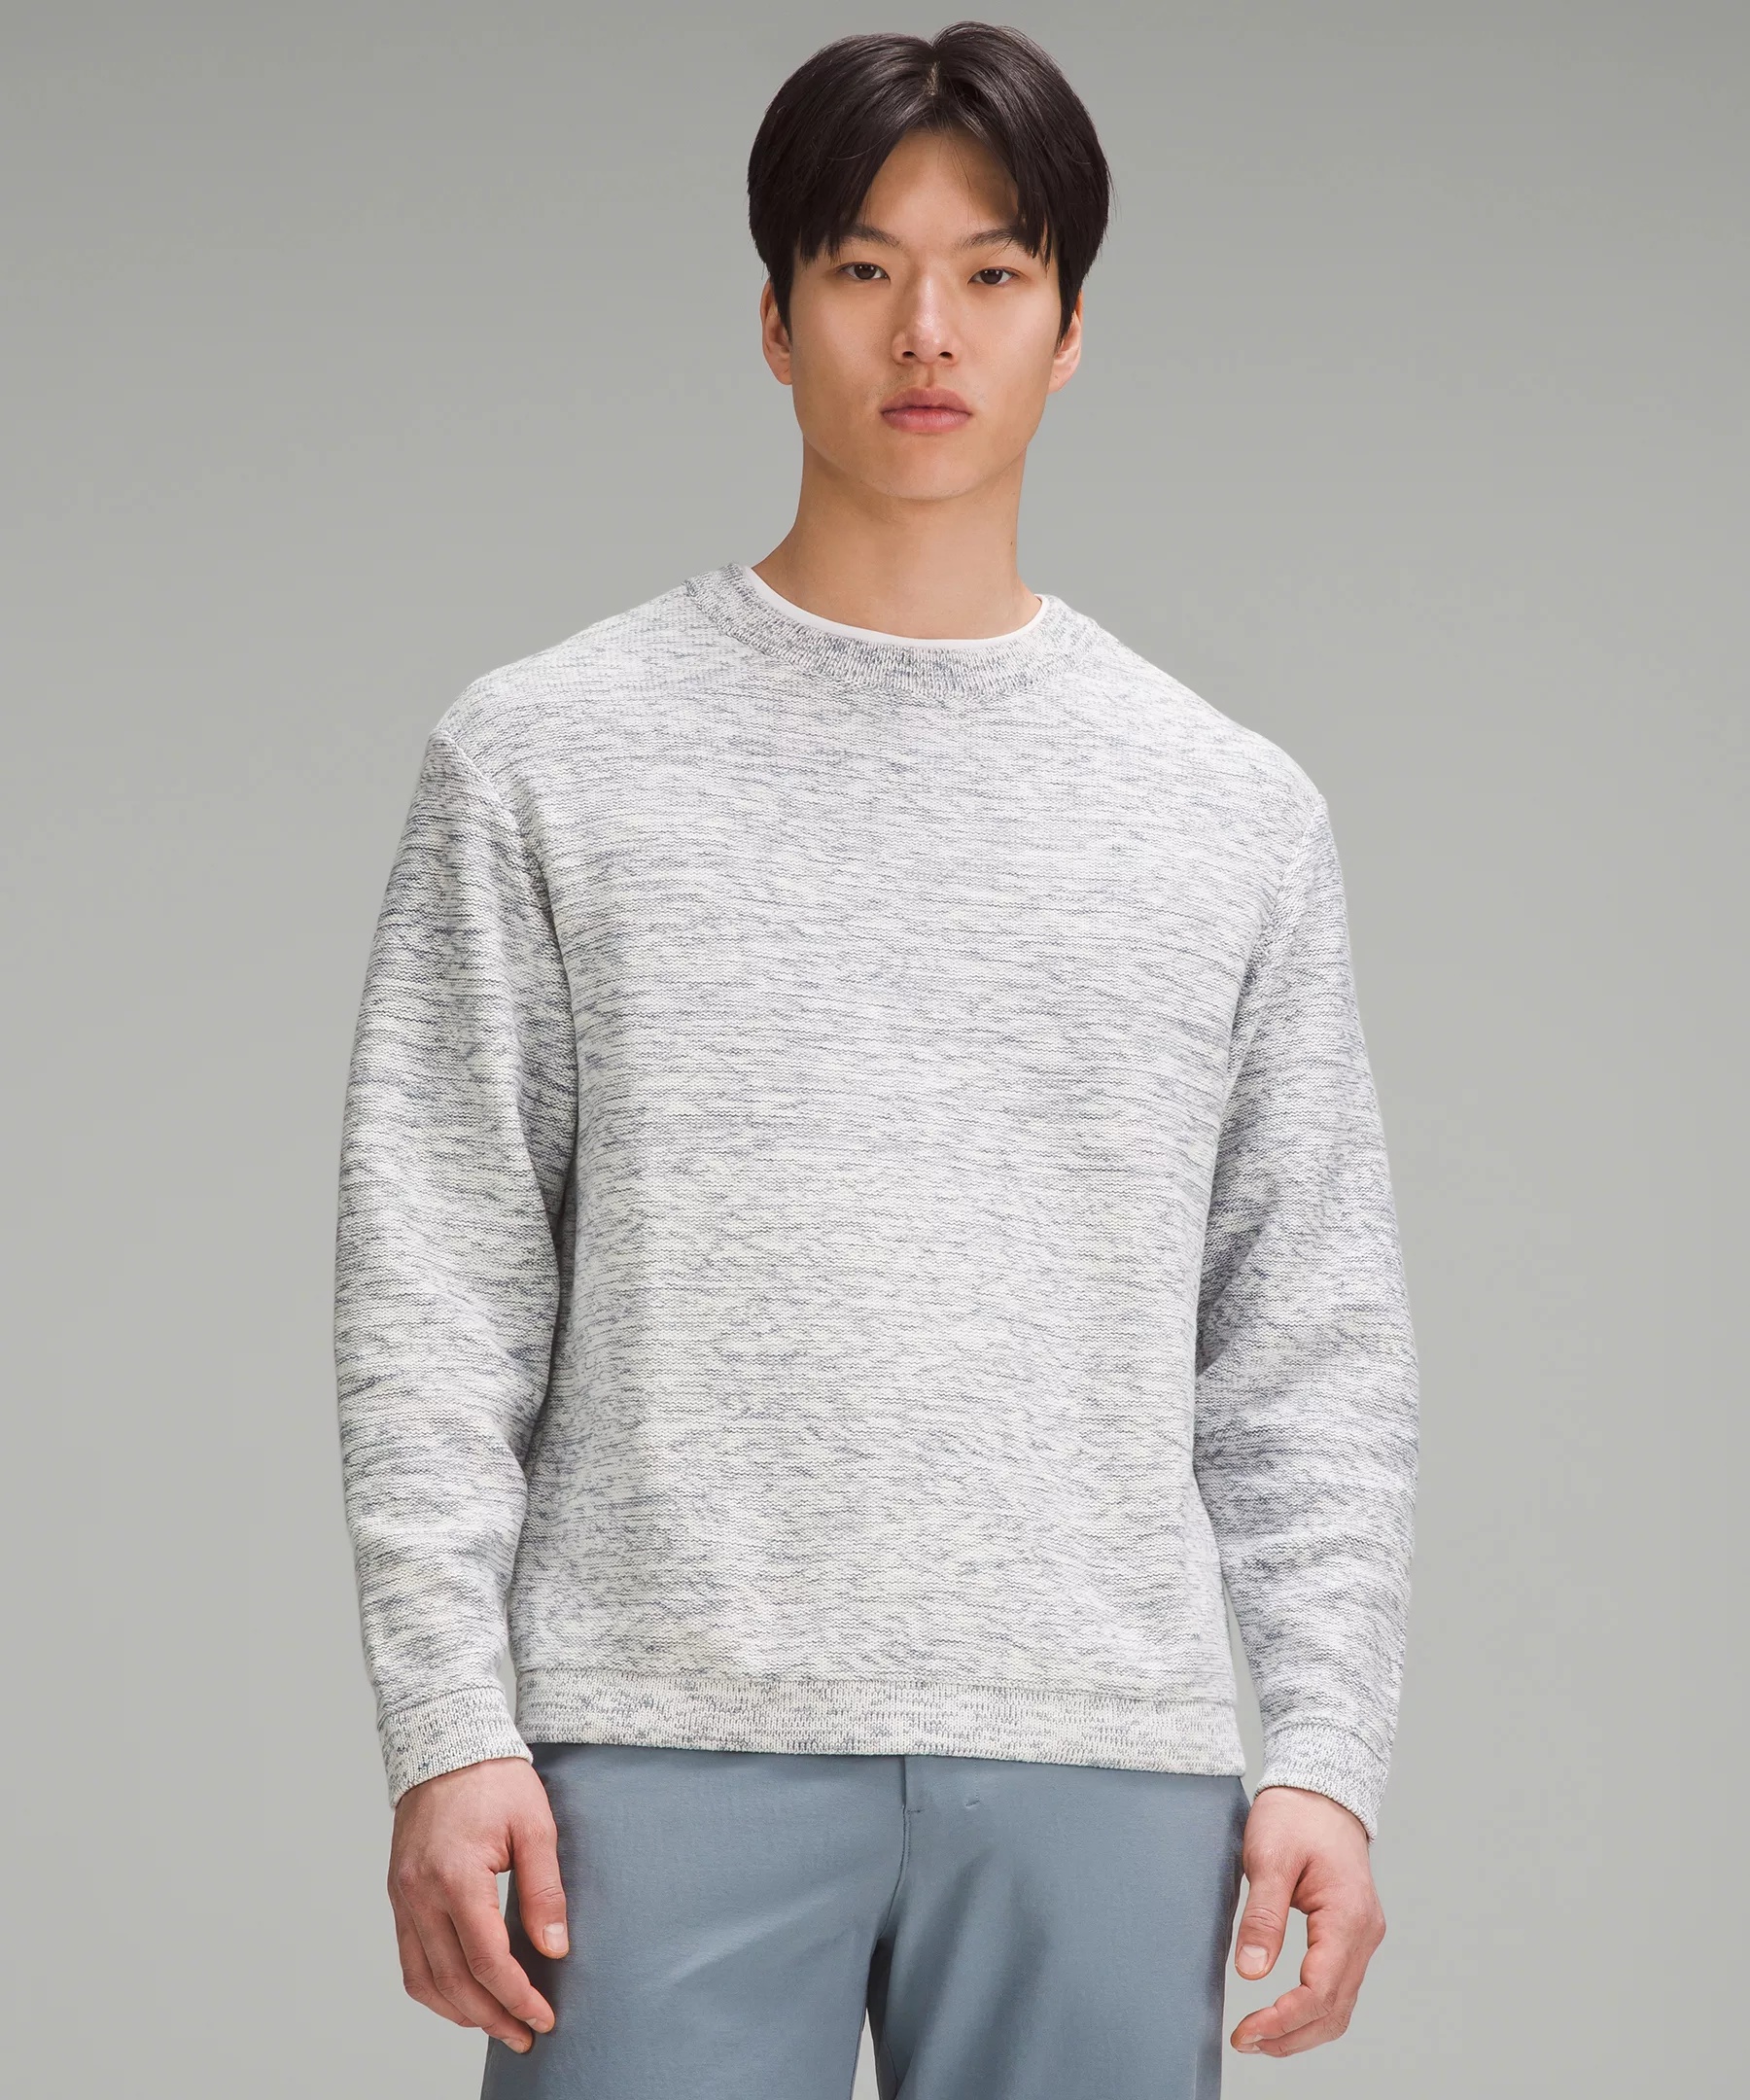 Relaxed-Fit Crewneck Knit Sweater - 1